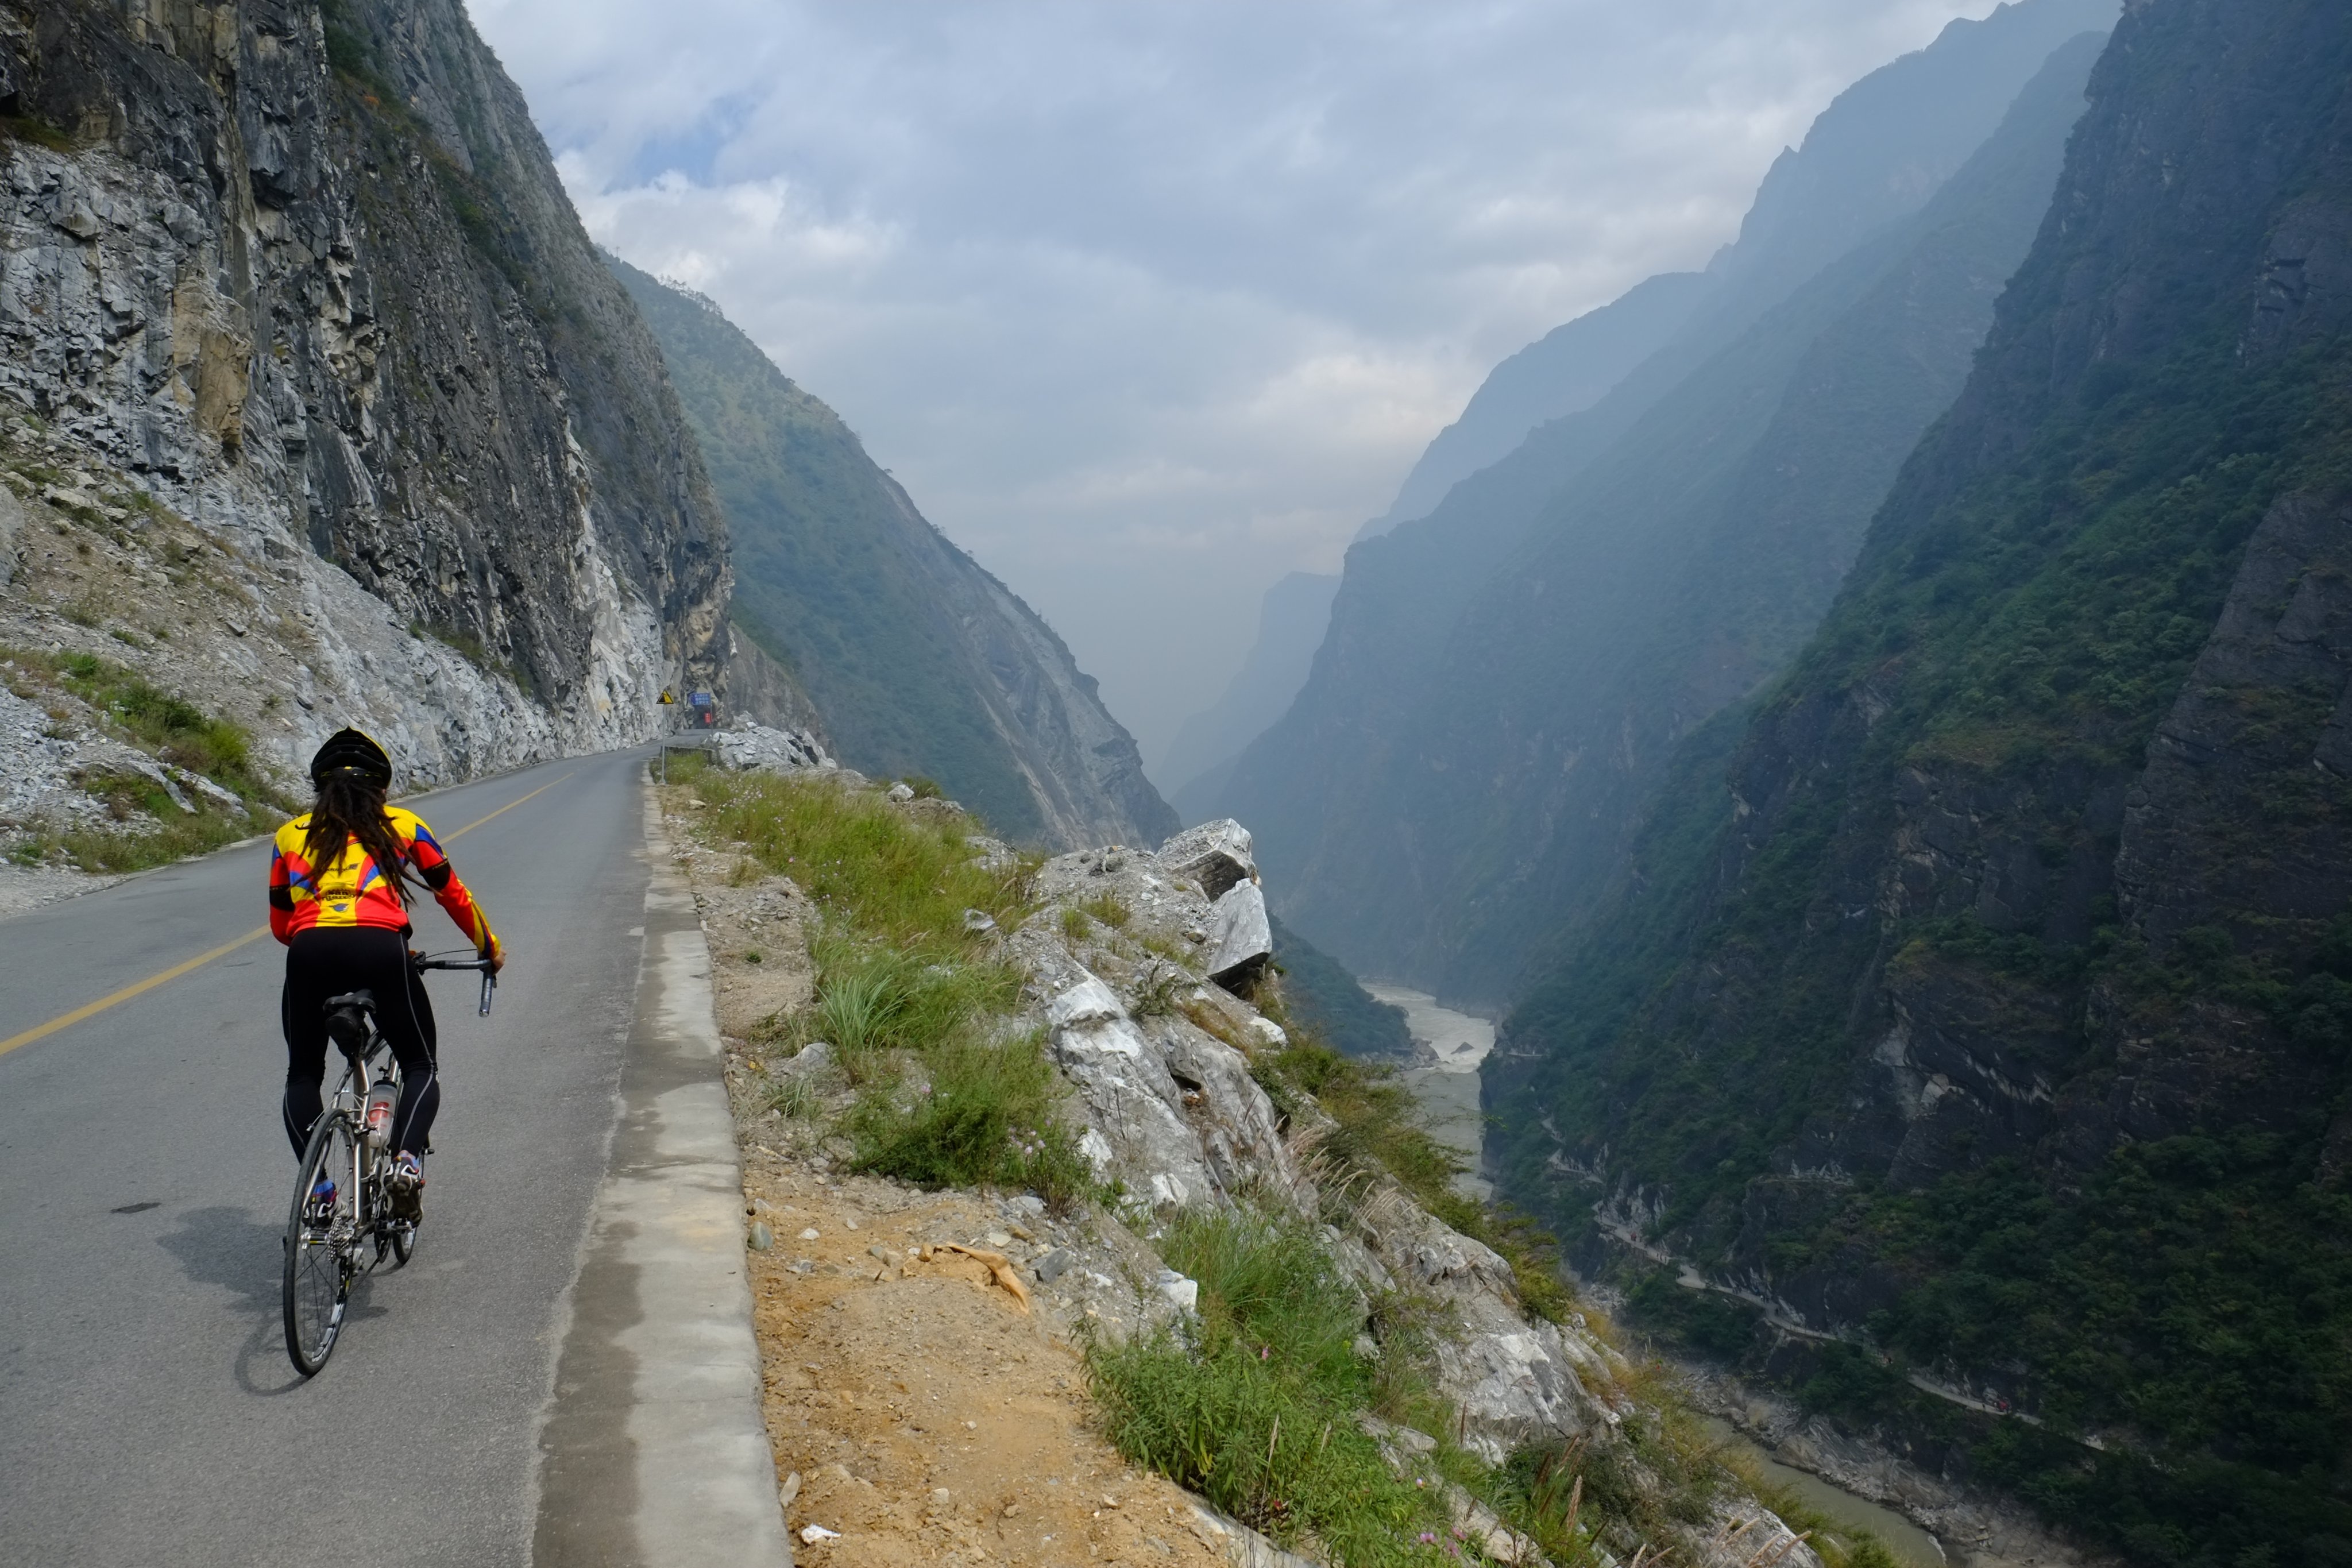 Cycling the road between Tiger Leaping Gorge and Shangri-La in Yunnan, China. Photo: Steve Thomas Images